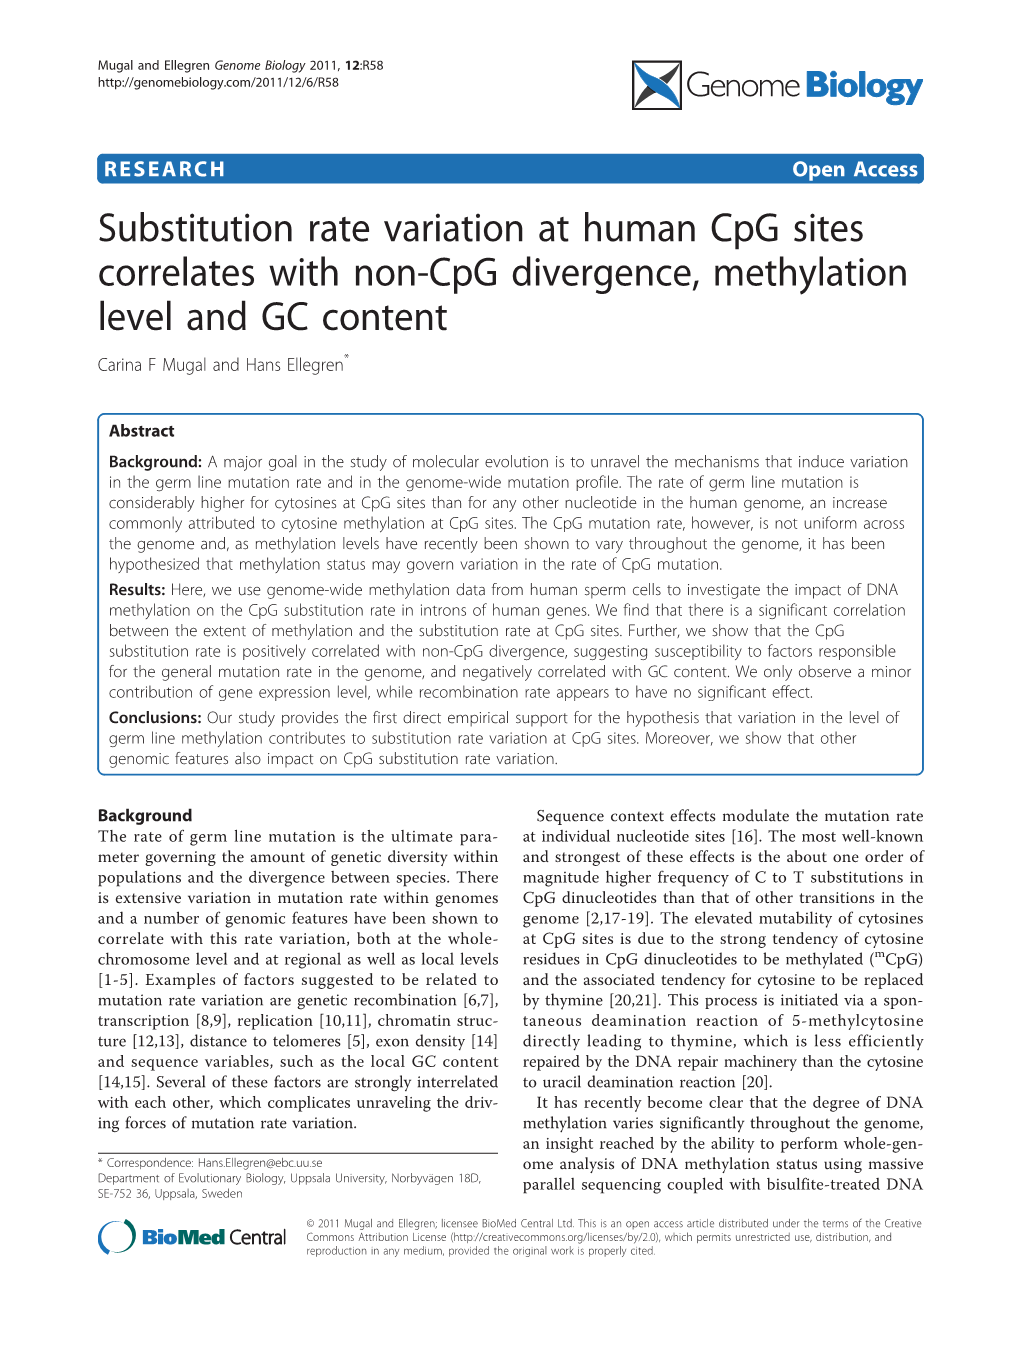 Substitution Rate Variation at Human Cpg Sites Correlates with Non-Cpg Divergence, Methylation Level and GC Content Carina F Mugal and Hans Ellegren*